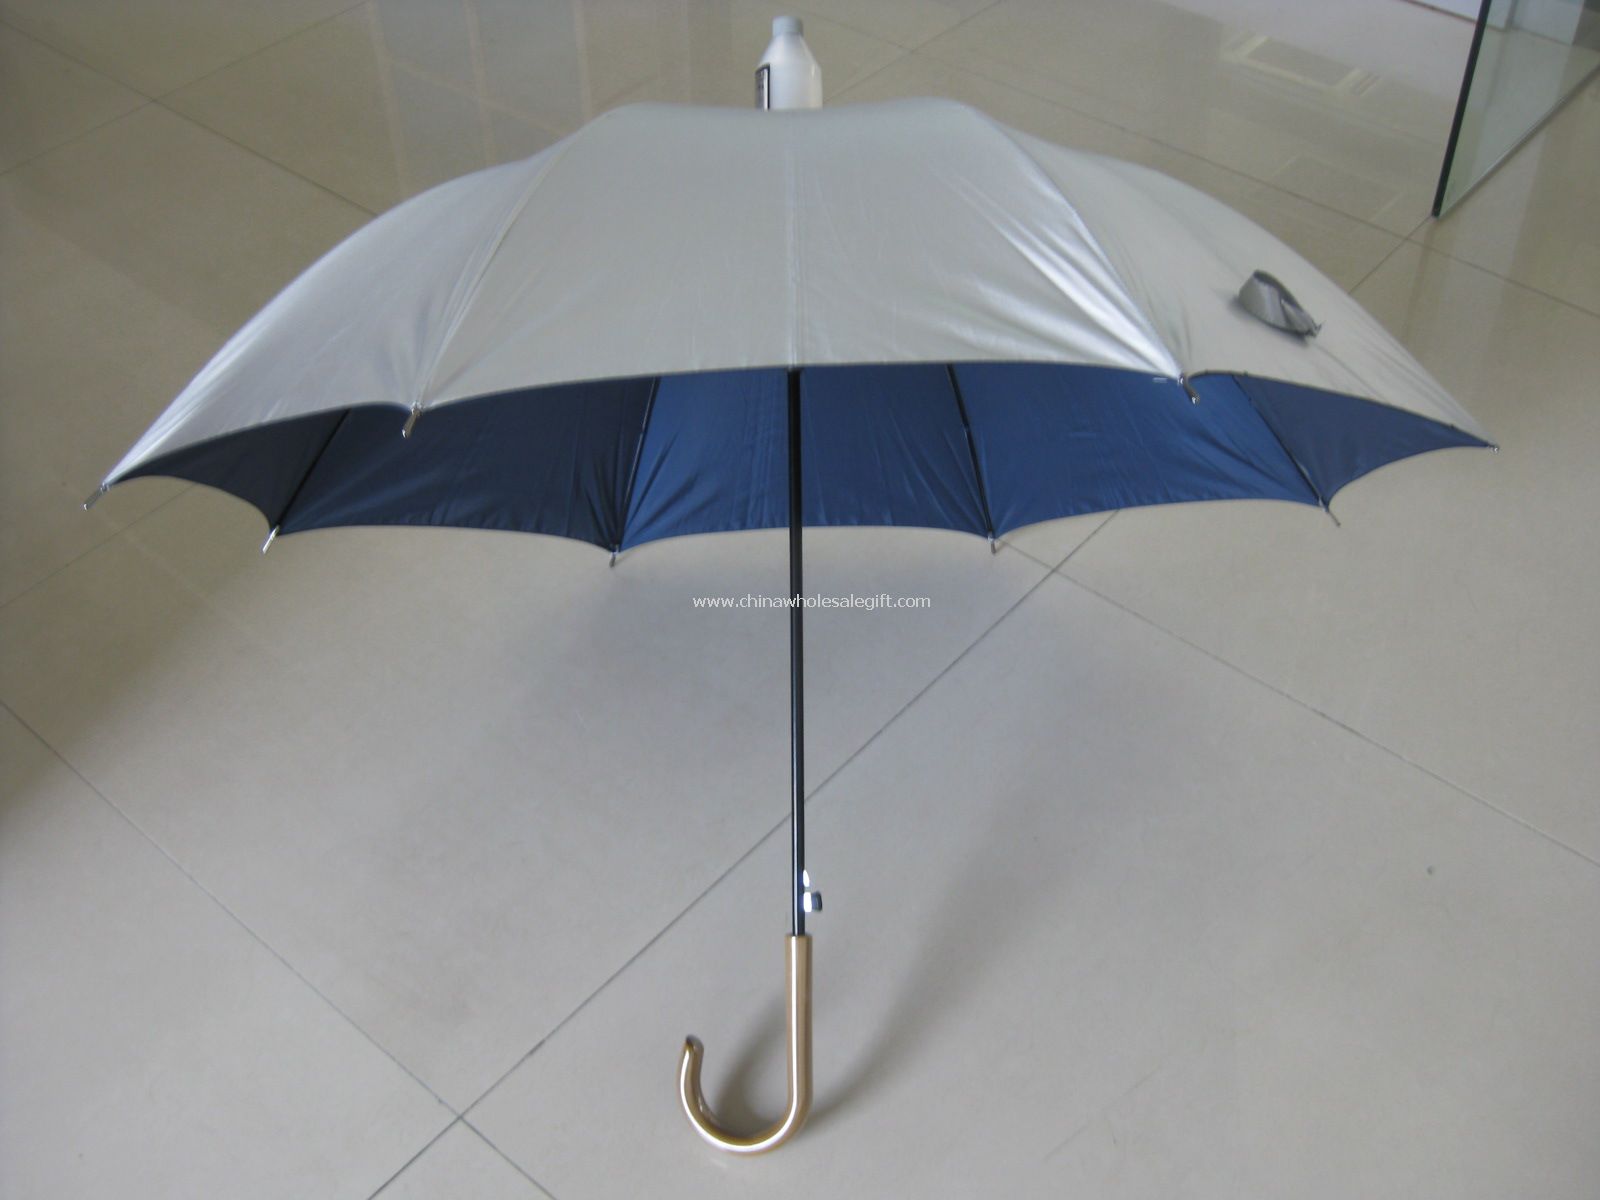 Umbrella with Water Proof Case